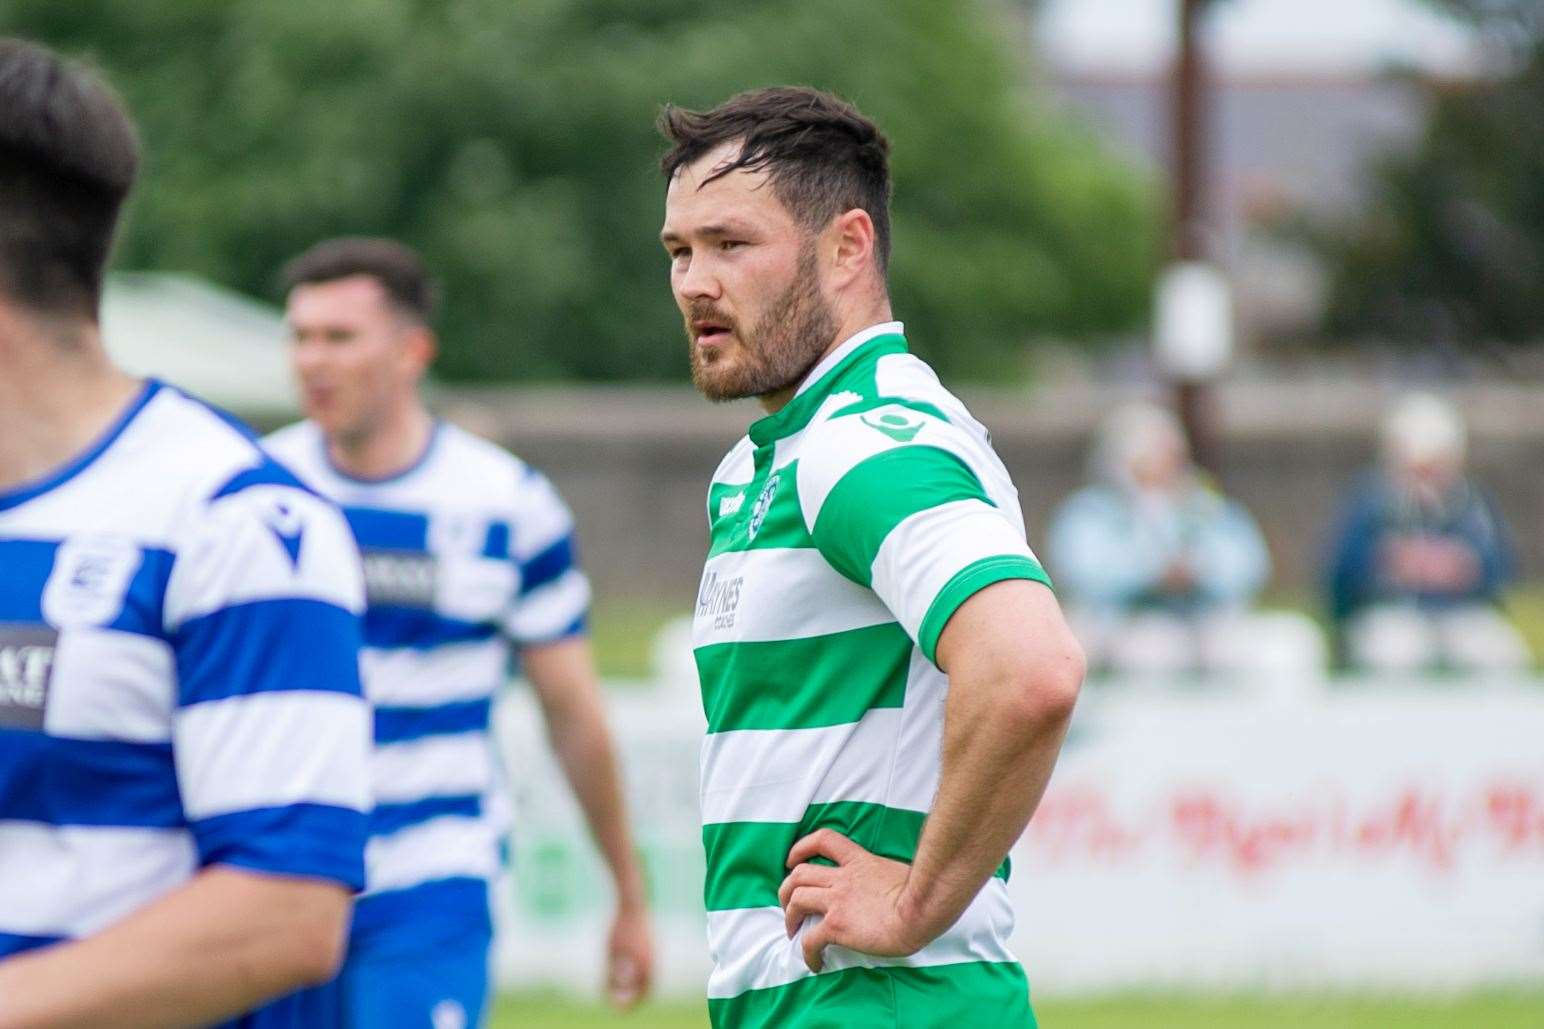 Graeme Stewart says his new striker, Adam MacLeod, will need time to readjust to the Highland League. Picture: Daniel Forsyth